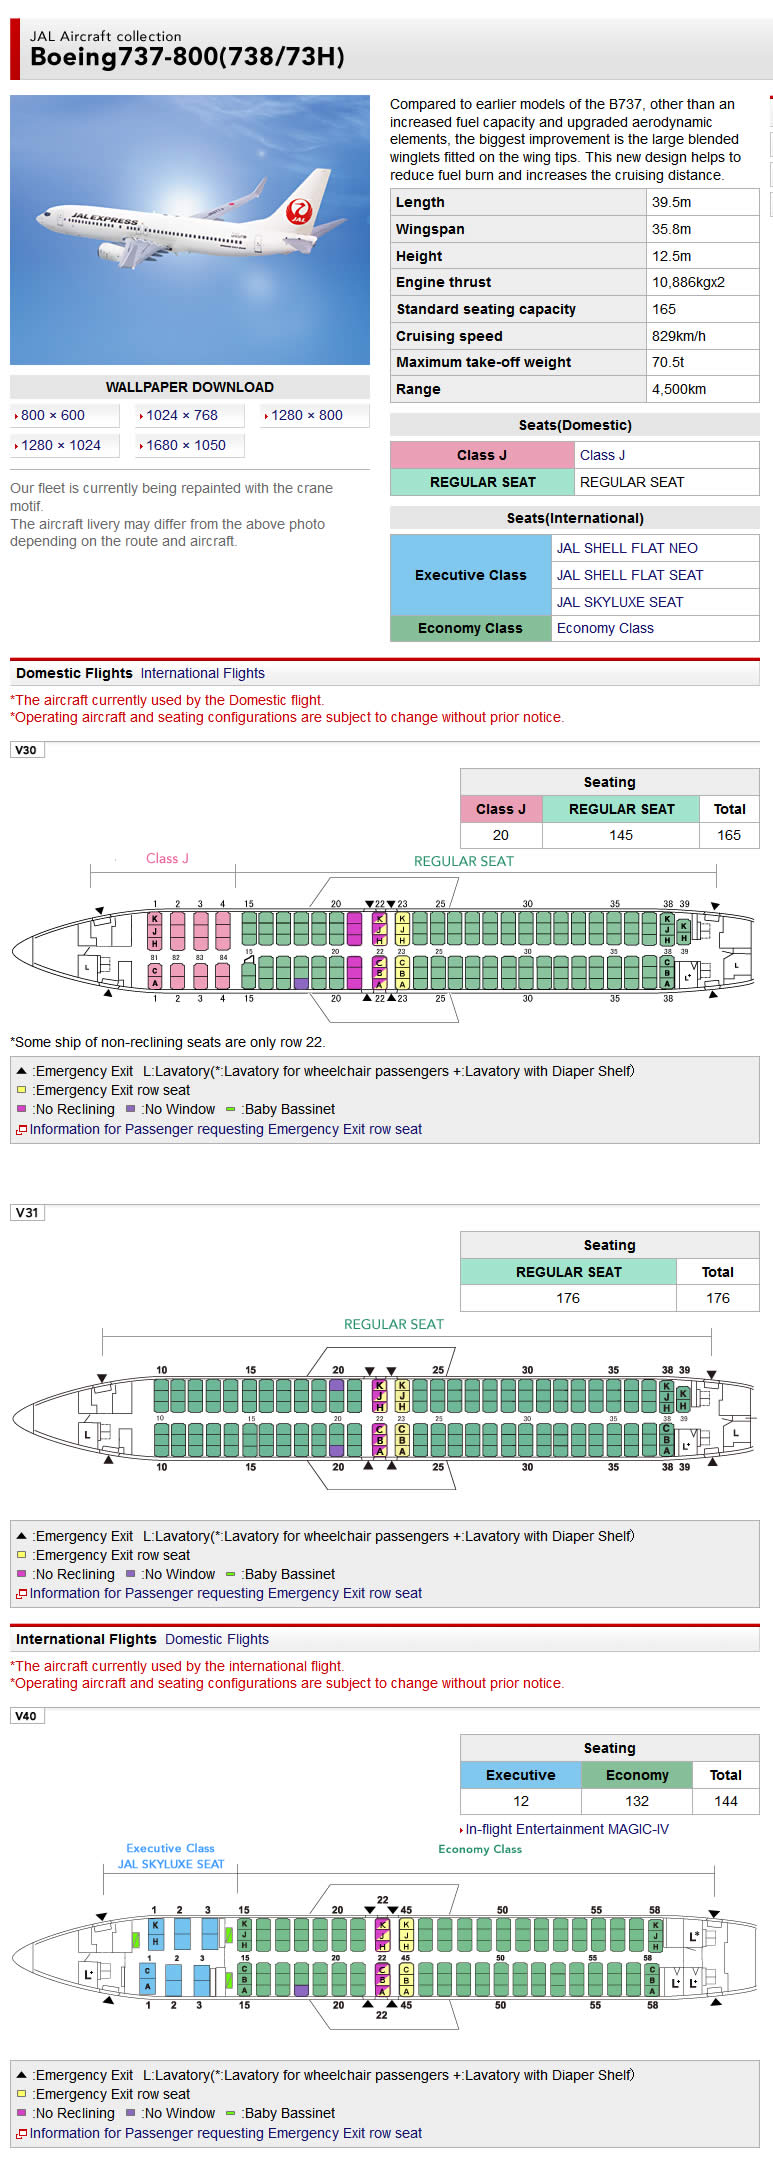 JAL JAPAN AIR AIRLINES BOEING 737-800 AIRCRAFT SEATING CHART